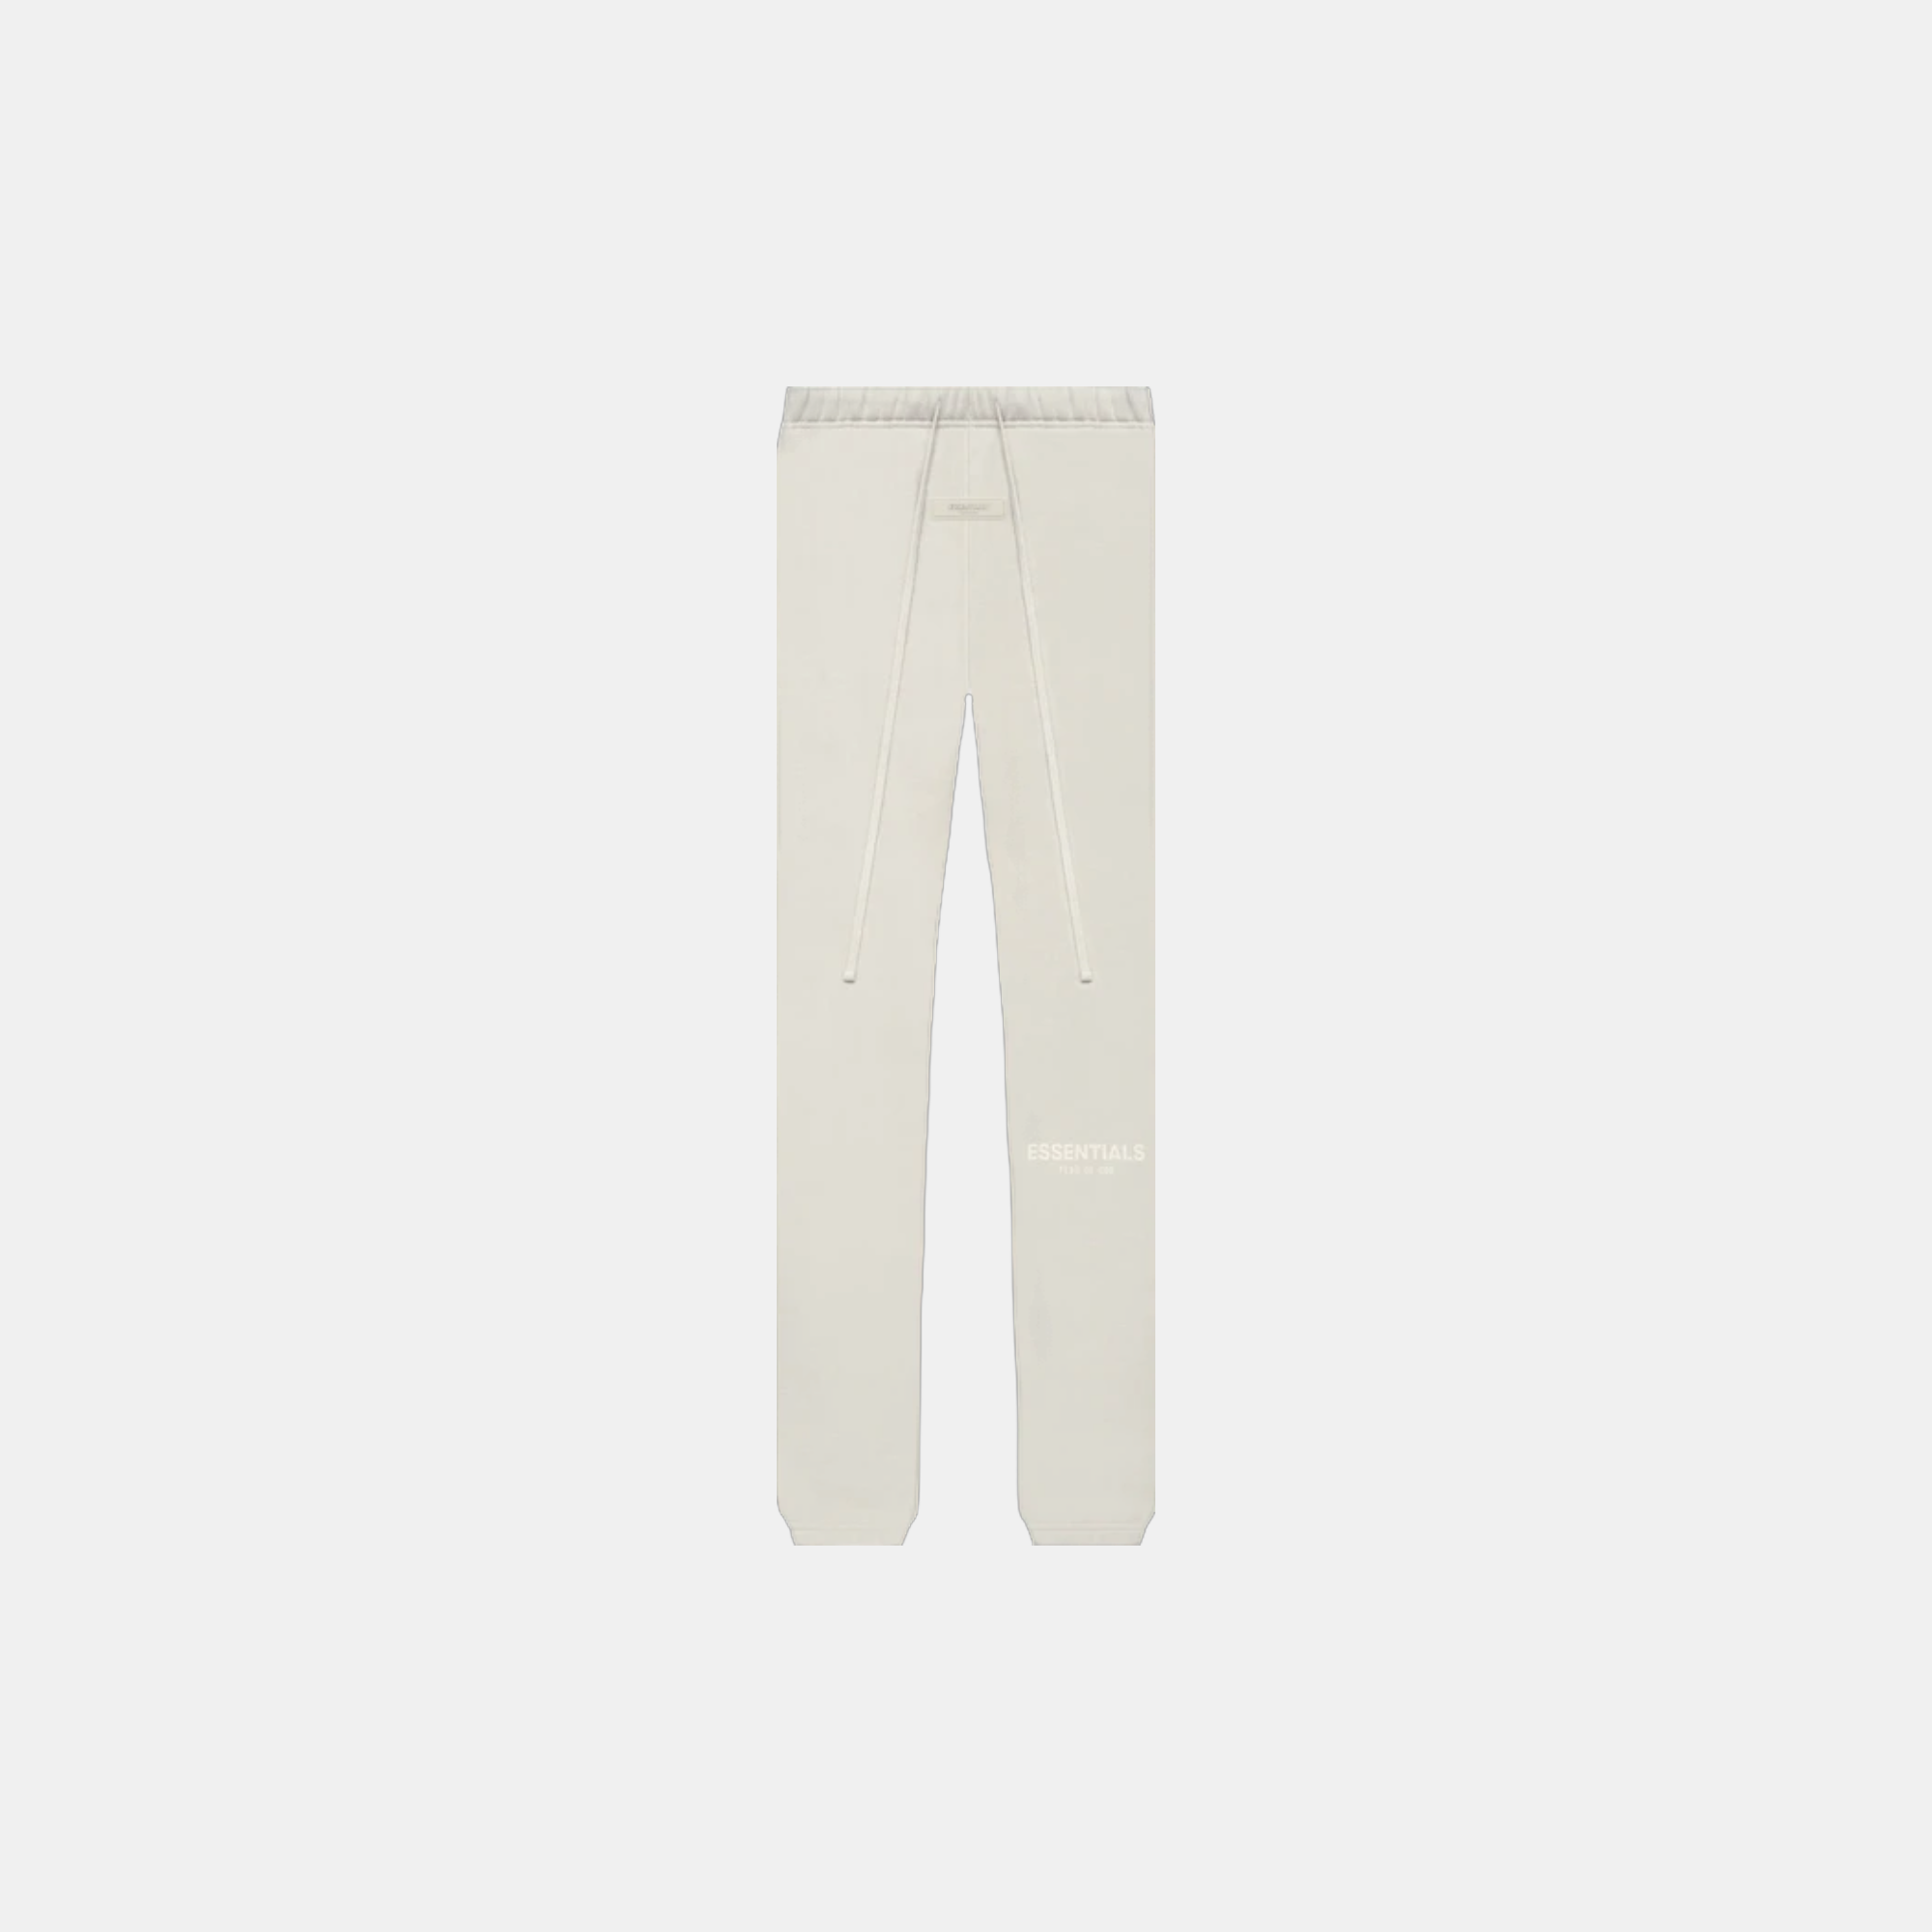 Fear of God Essentials Sweatpants 'Wheat' | NWAHYPE